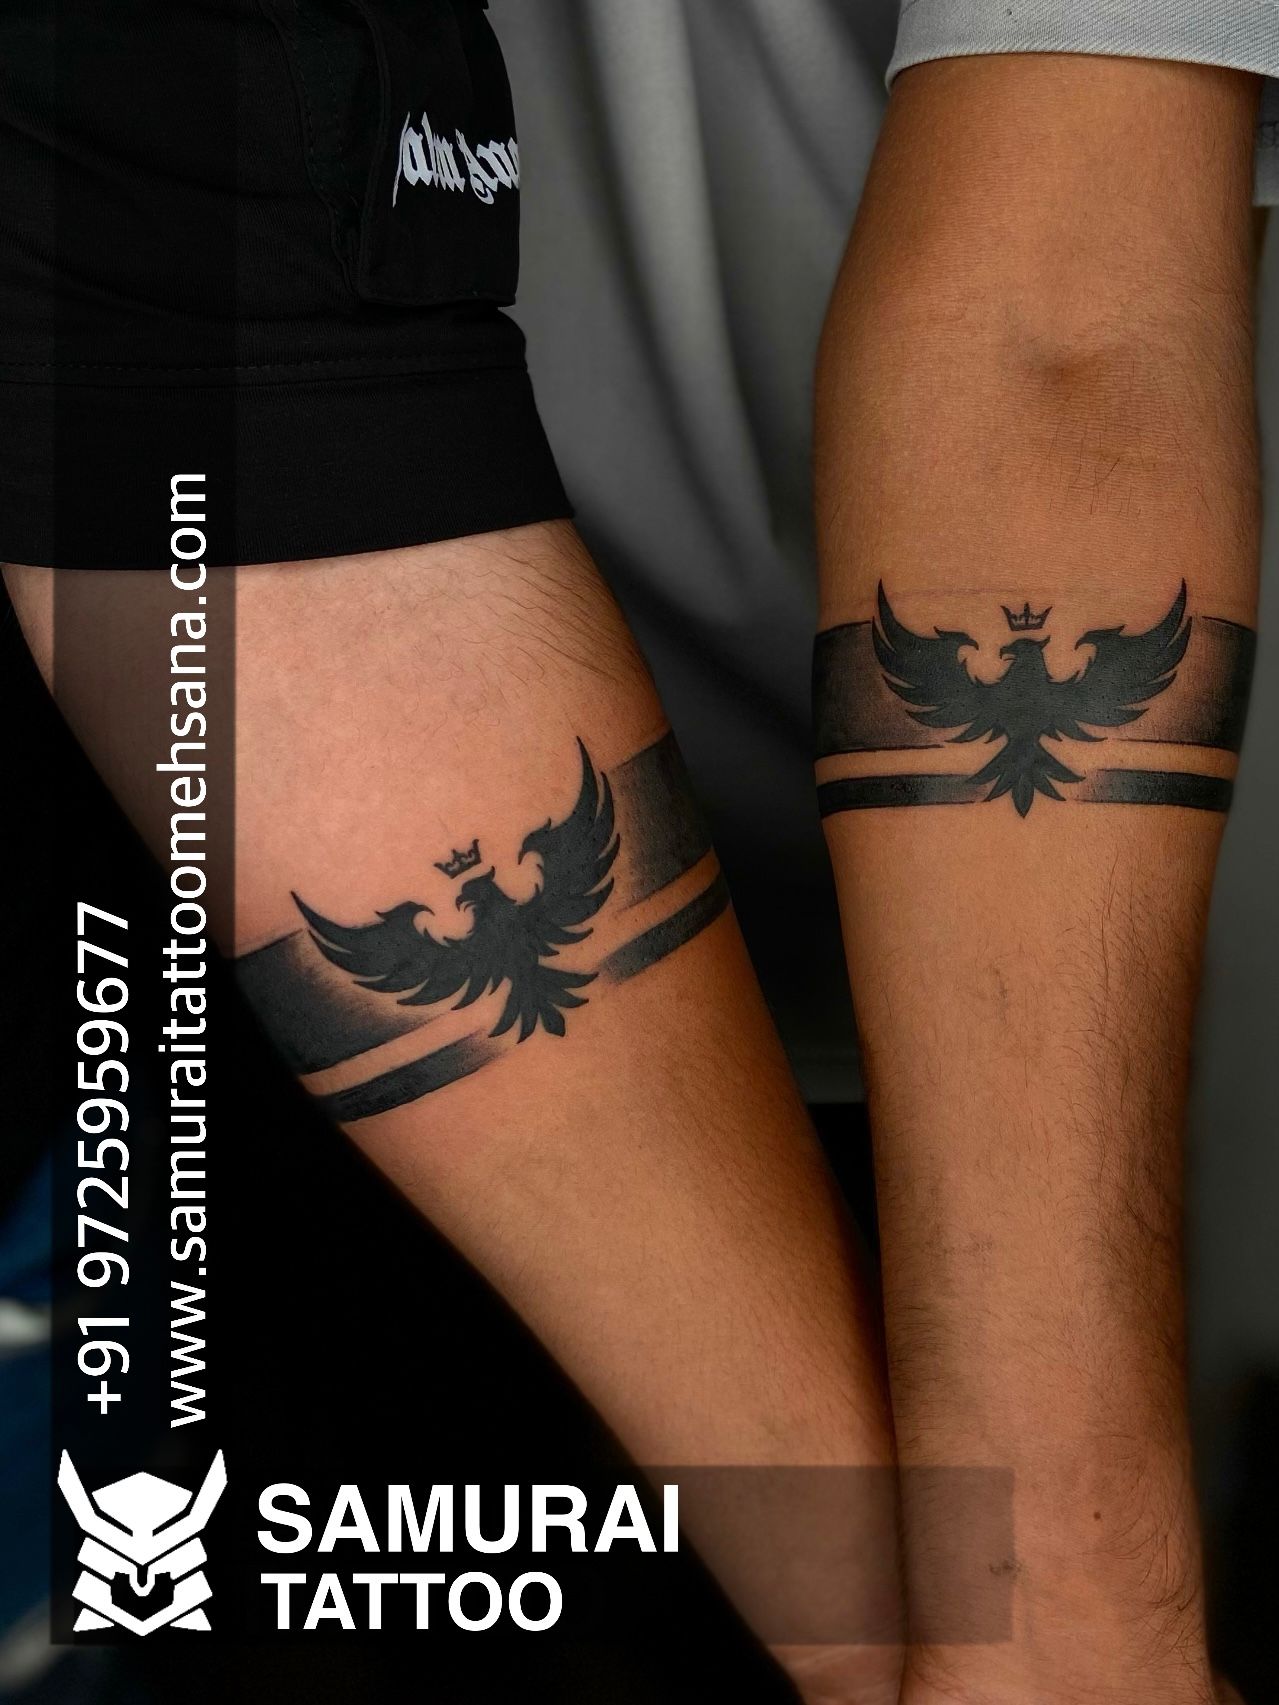 Simple Two-Band Tattoo Design | Tattoo Ink Master